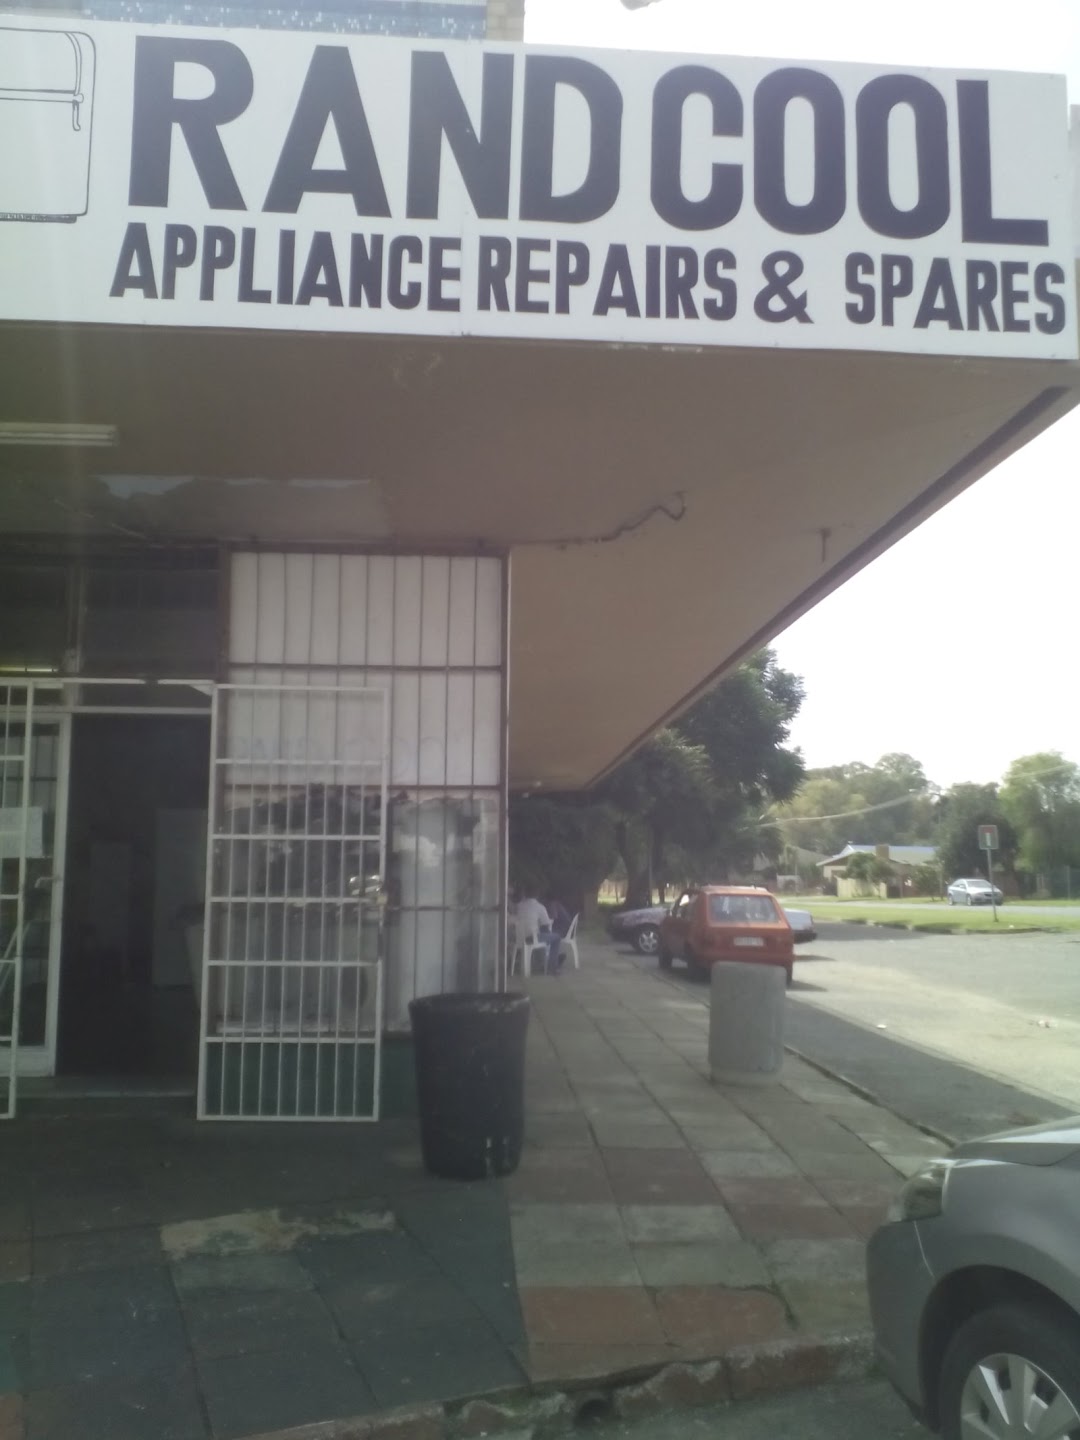 Rand Cool Appliance Repairs & Spares